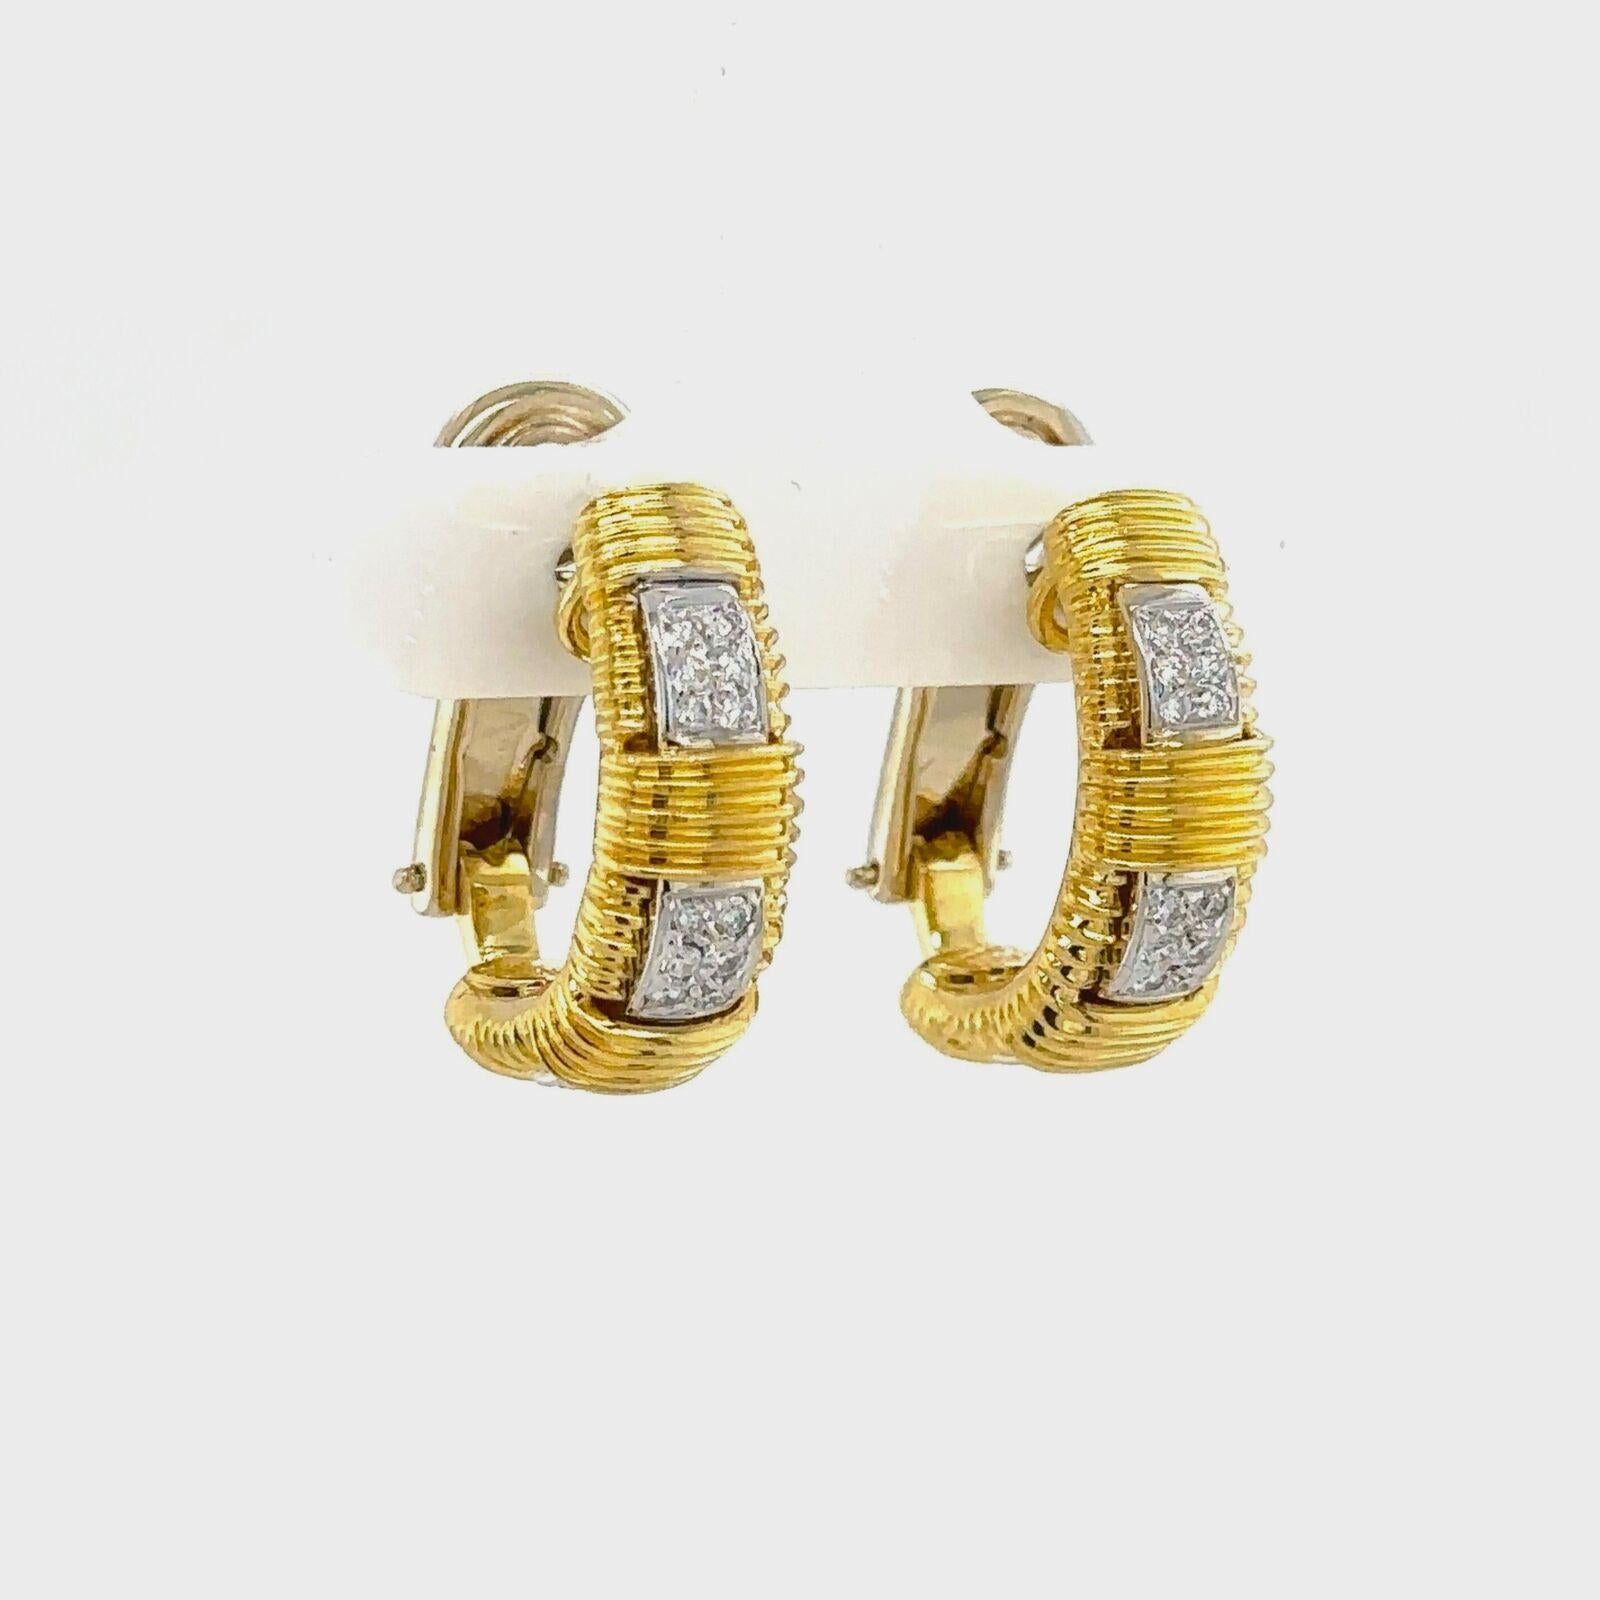 Roberto Coin Appassionata 18 Karat Yellow Gold and Diamond Hoop Earrings For Sale